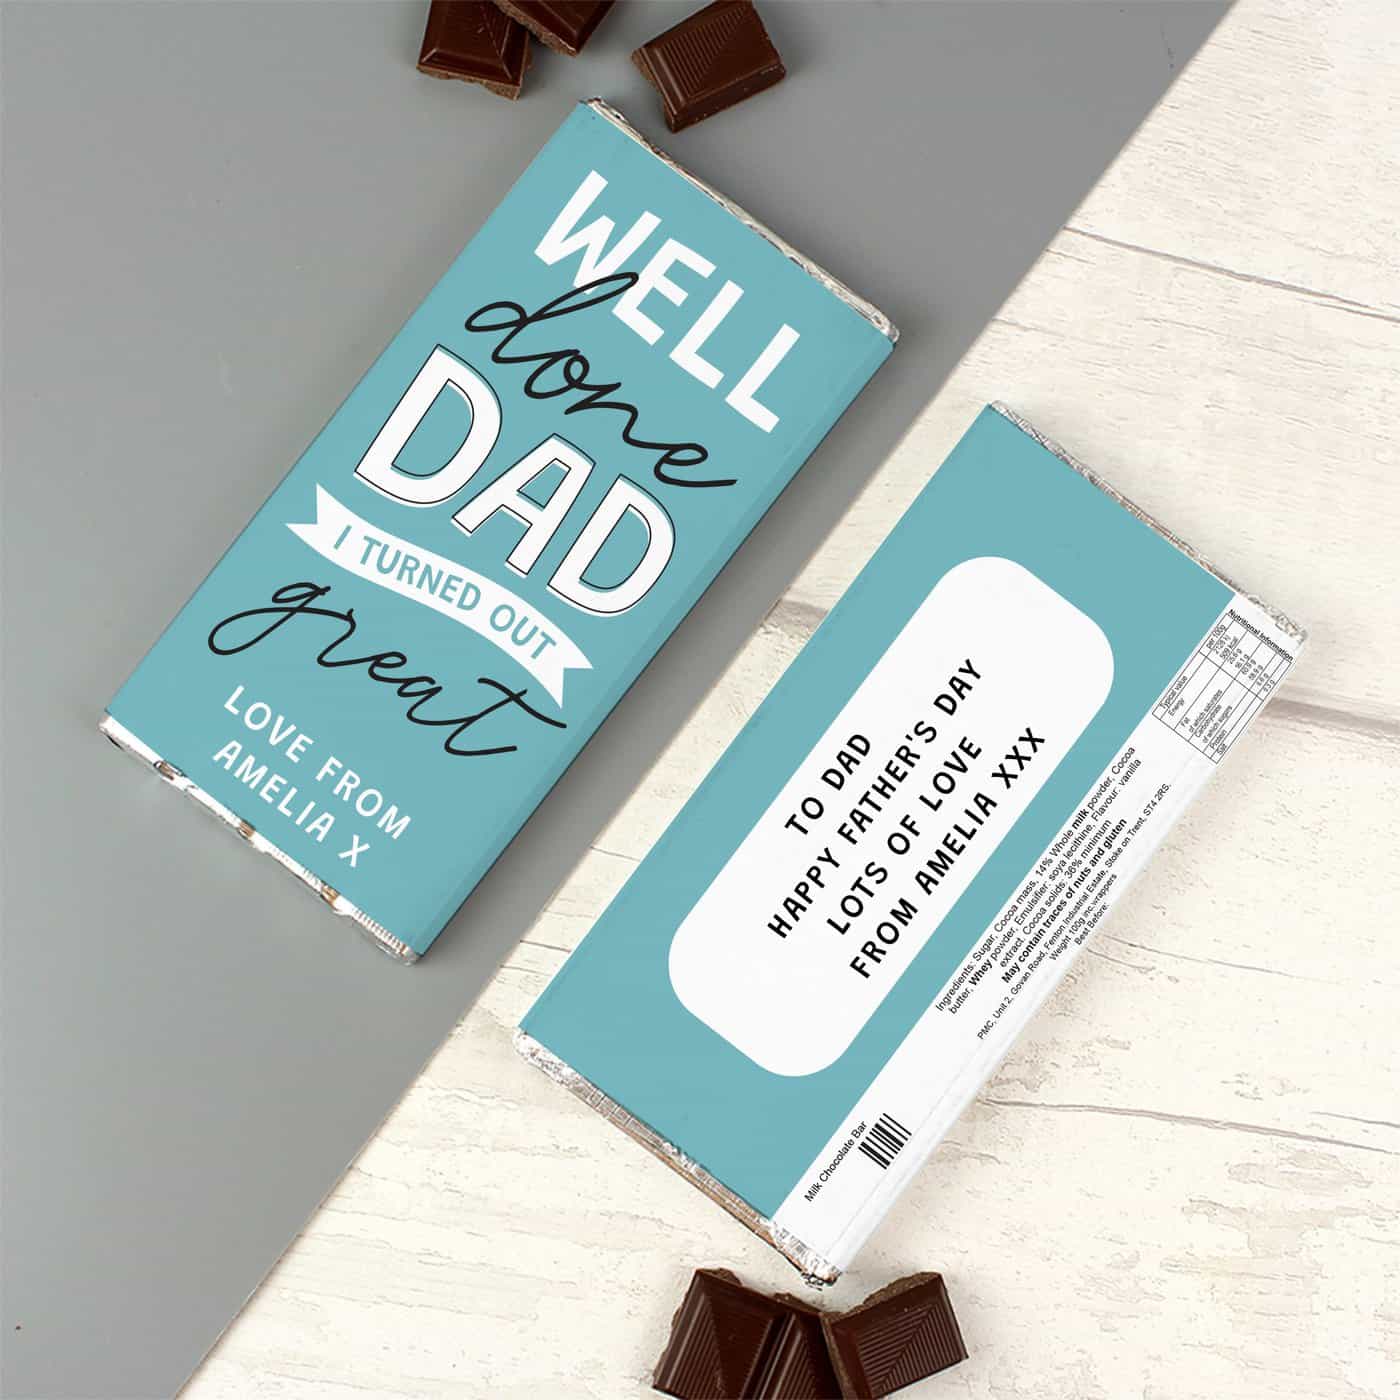 Personalised Well Done Dad... Milk Chocolate Bar